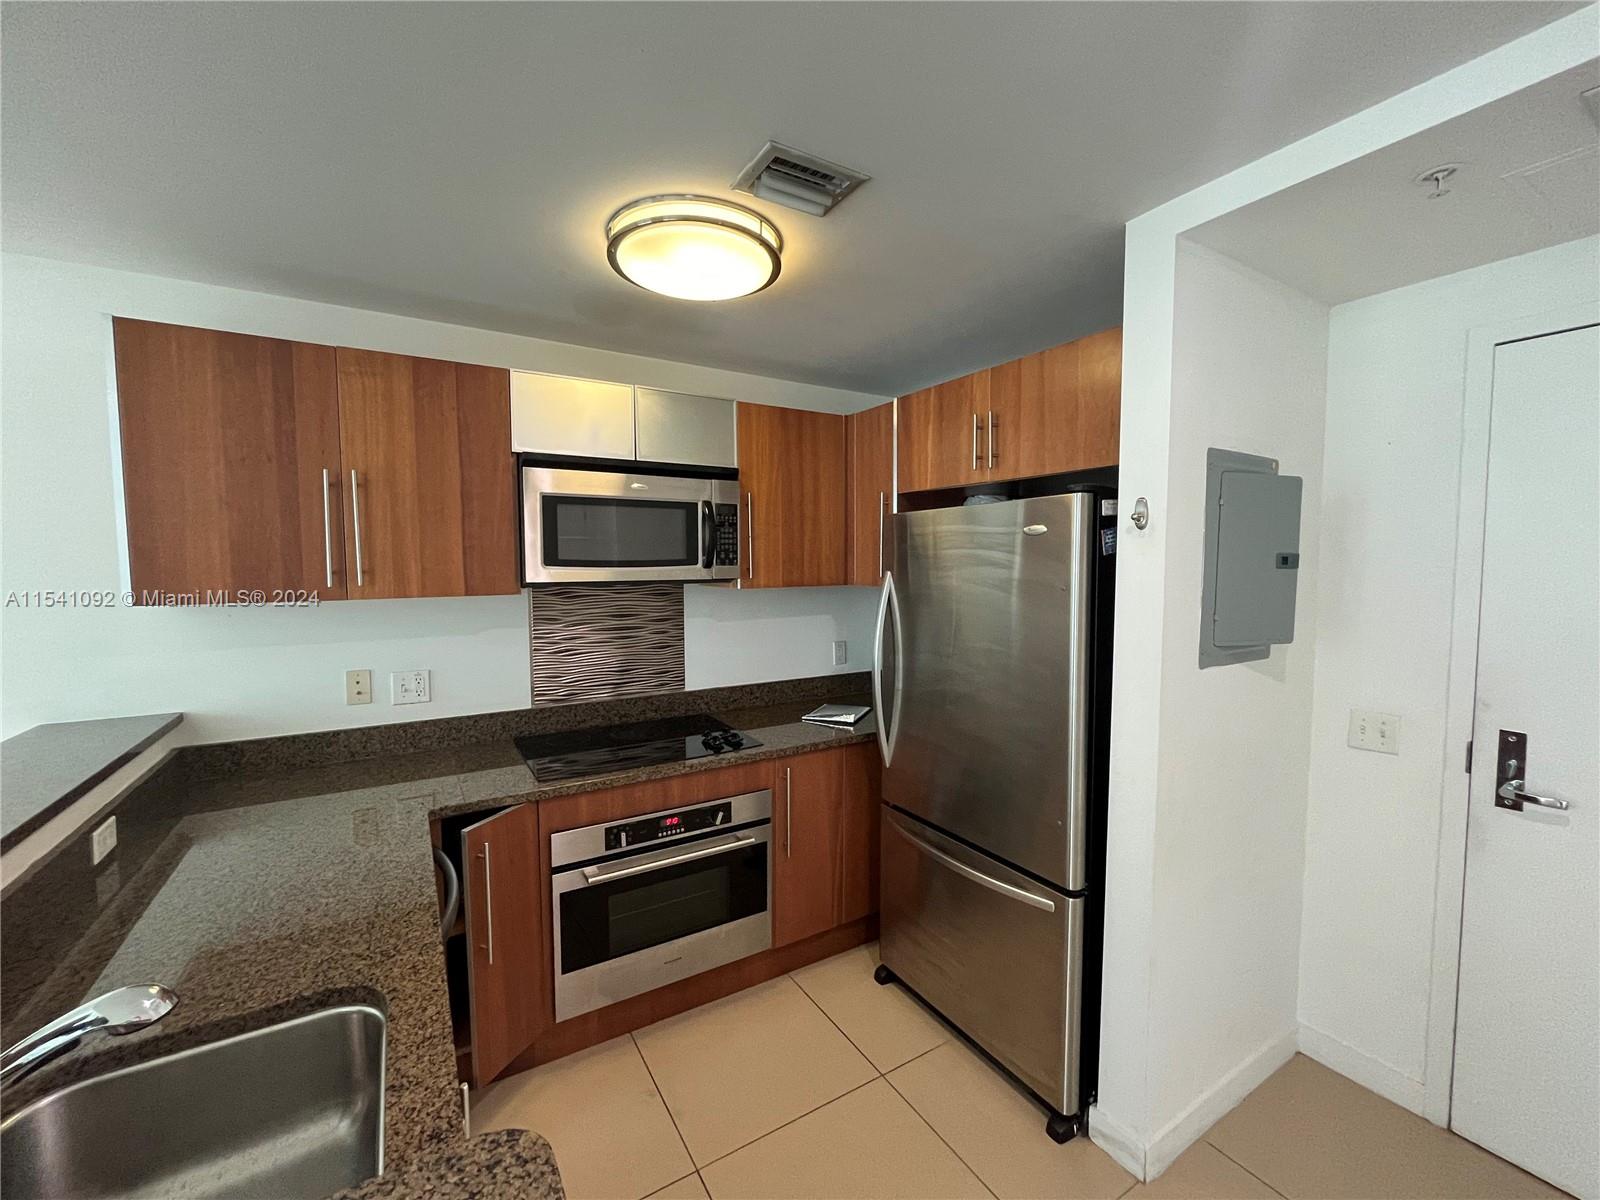 1 bed + 1.5 bath with great views, best location within walking distance to Brickell and Downtown. Italian cabinetry, stainless steel appliances, granite countertops, washer & dryer, and walk-in closets. Super amenities include an infinity pool, gym, club room, and much more! Rent includes basic internet and cable with Hotwire provider. Washer and dryer inside.